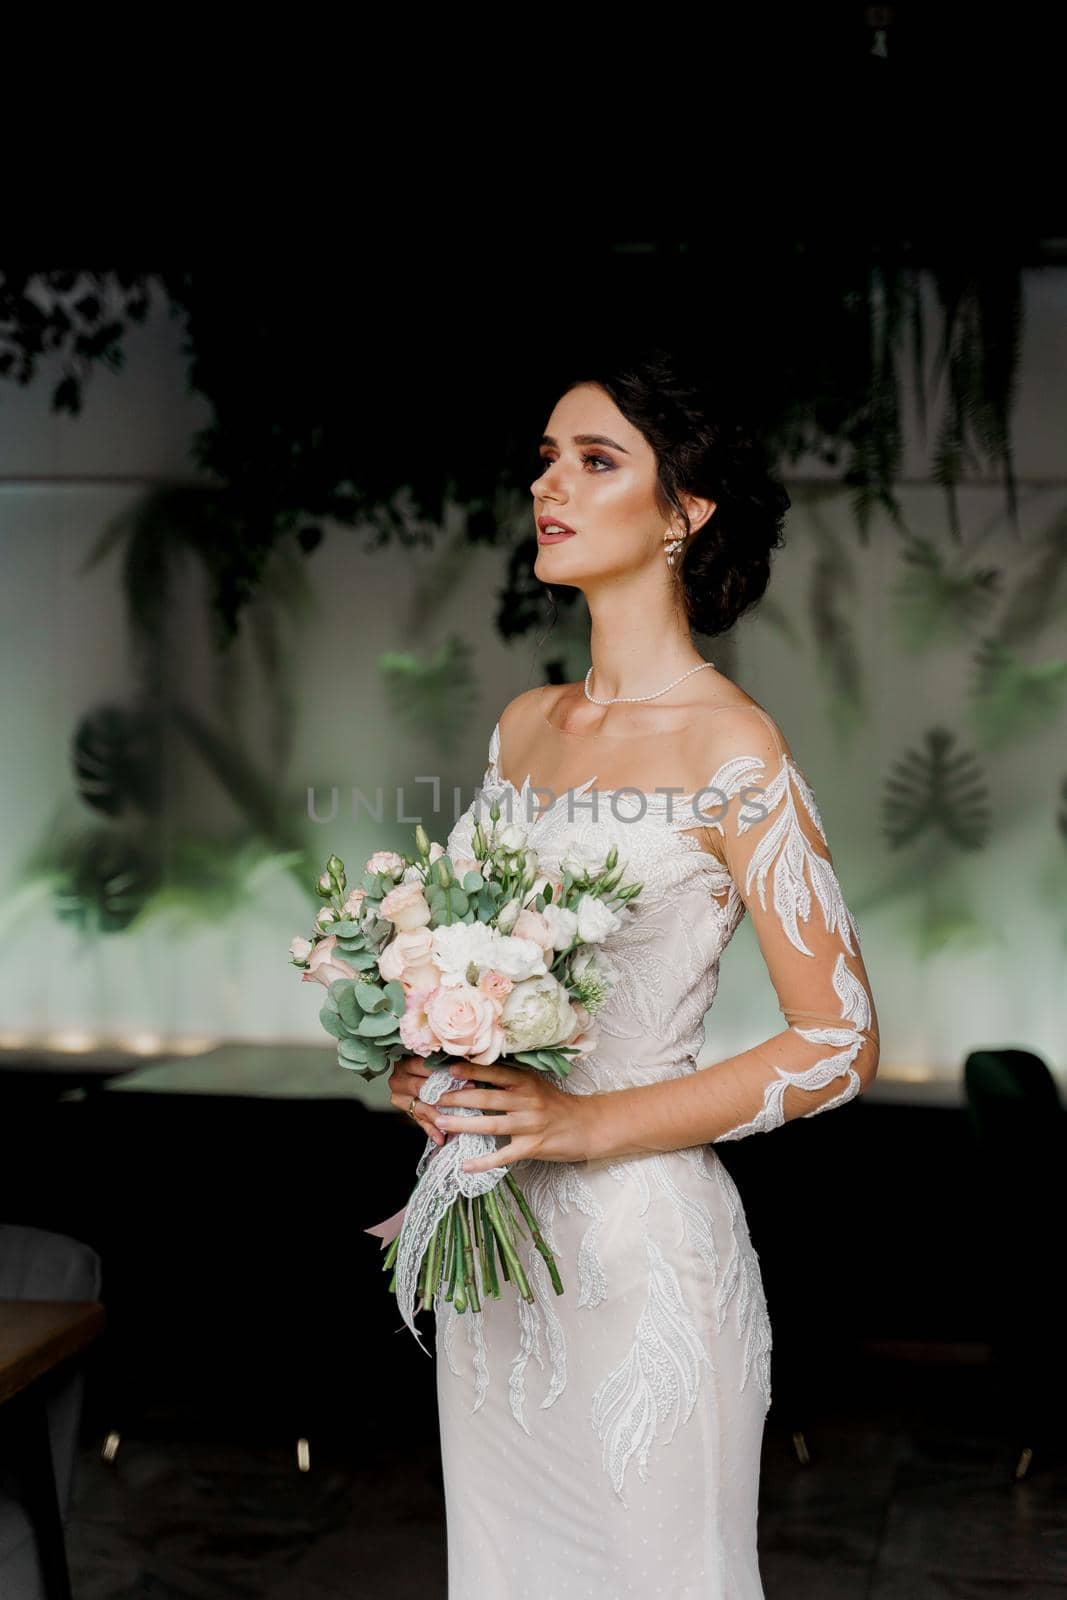 Bride in wedding dress and bridal veil in cafe. Advert for social networks for wedding agency and bridal salon. by Rabizo